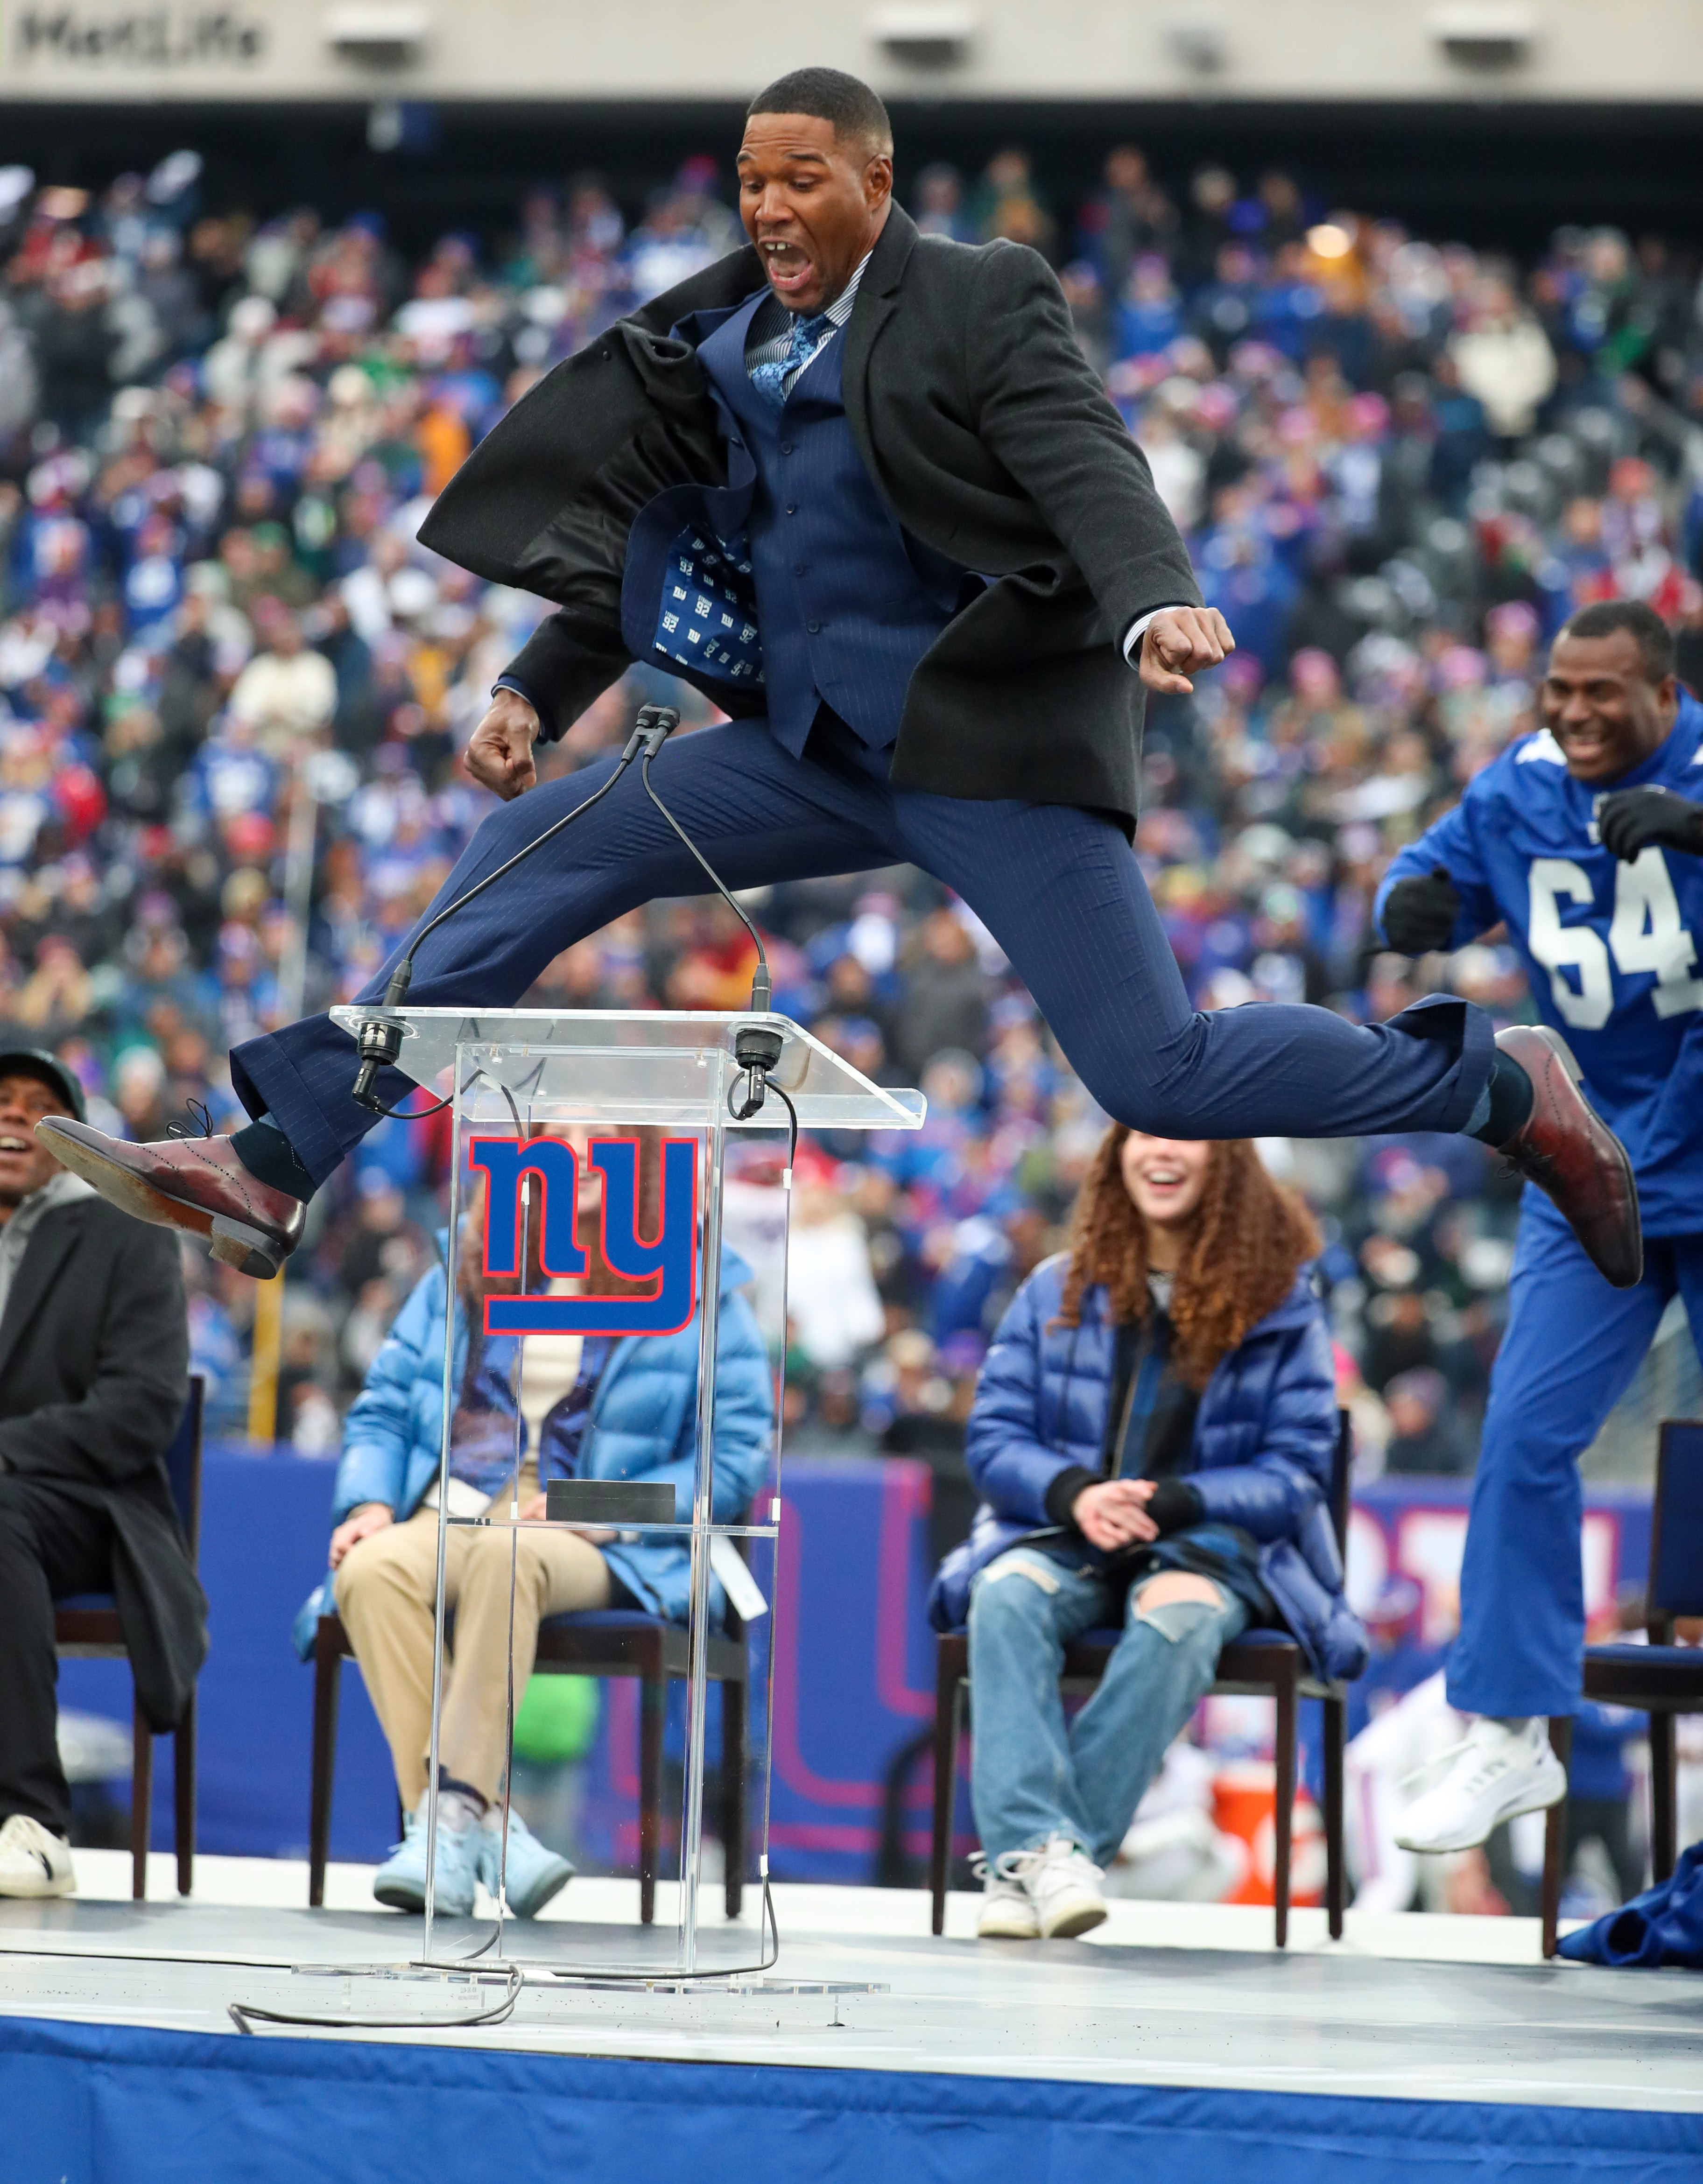 Former New York Giants defensive end Michael Strahan leaps on stage during a halftime ceremony to retire his No. 92 on Sunday, Nov. 28, 2021 at MetLife Stadium.